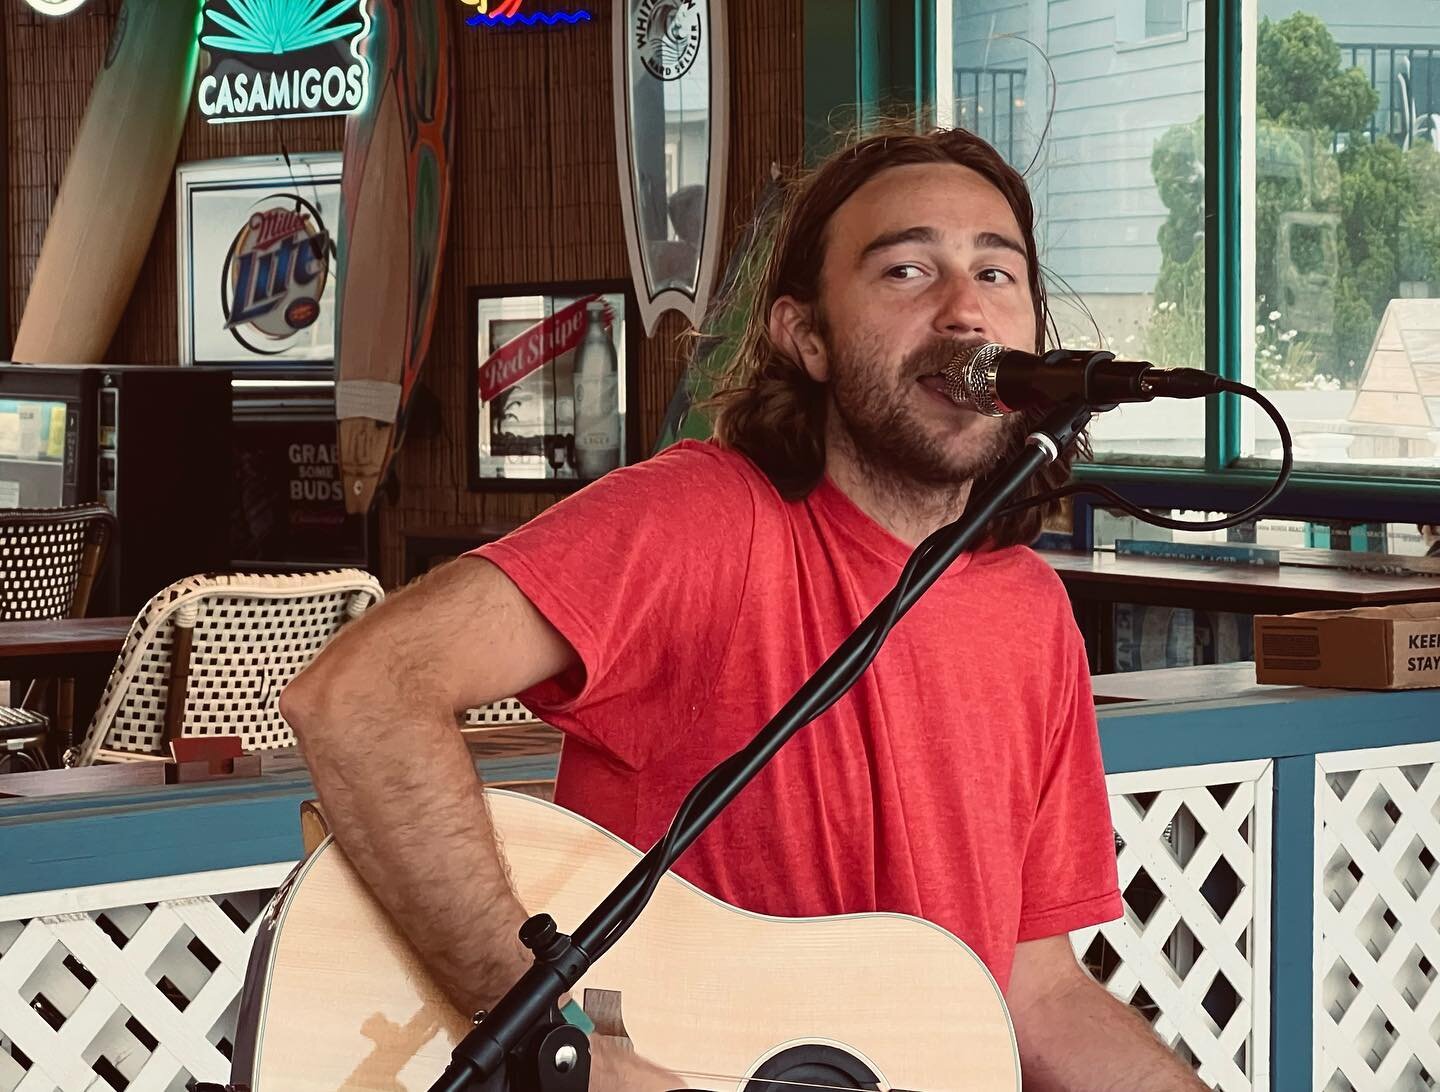 Still in weekend mode? Come party at @jenksinlet TONIGHT 6-9! Open to people and dogs alike! 🐕🍹 #livemusic #musician #jenks #pointpleasantbeach